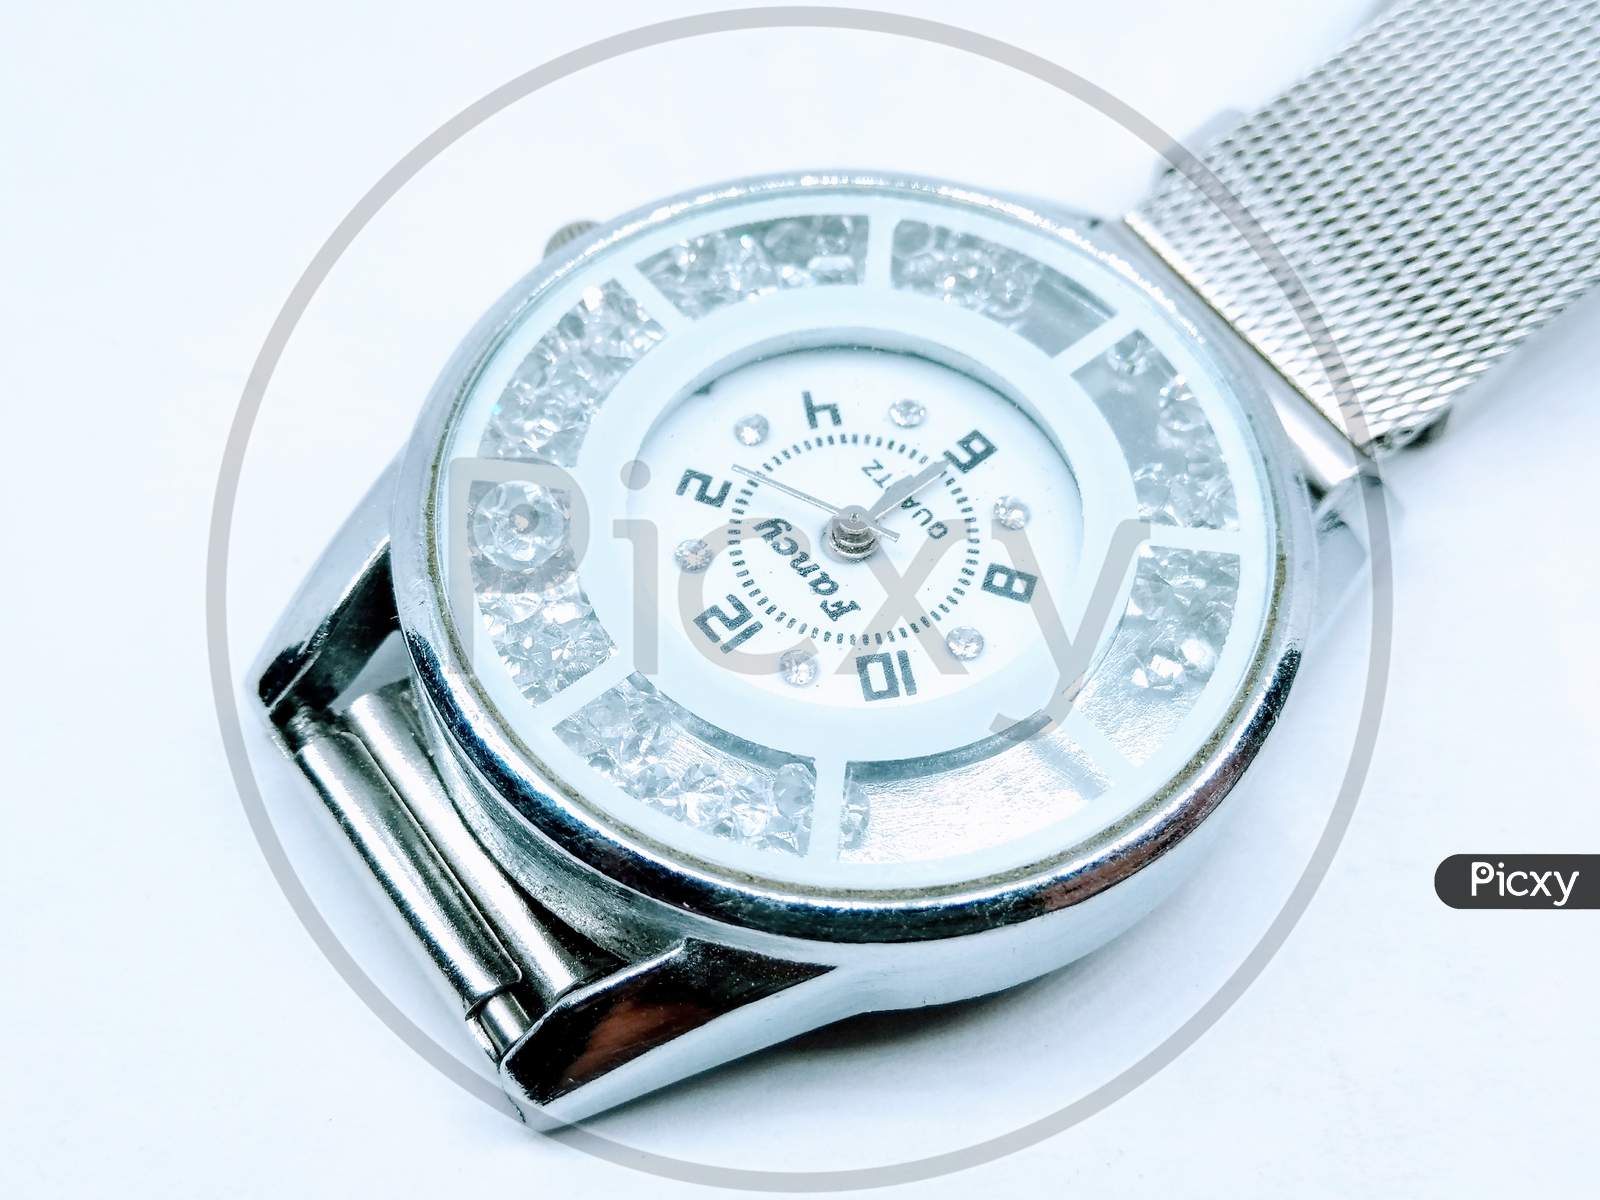 Men's Wrist Watch On an Isolated White Background